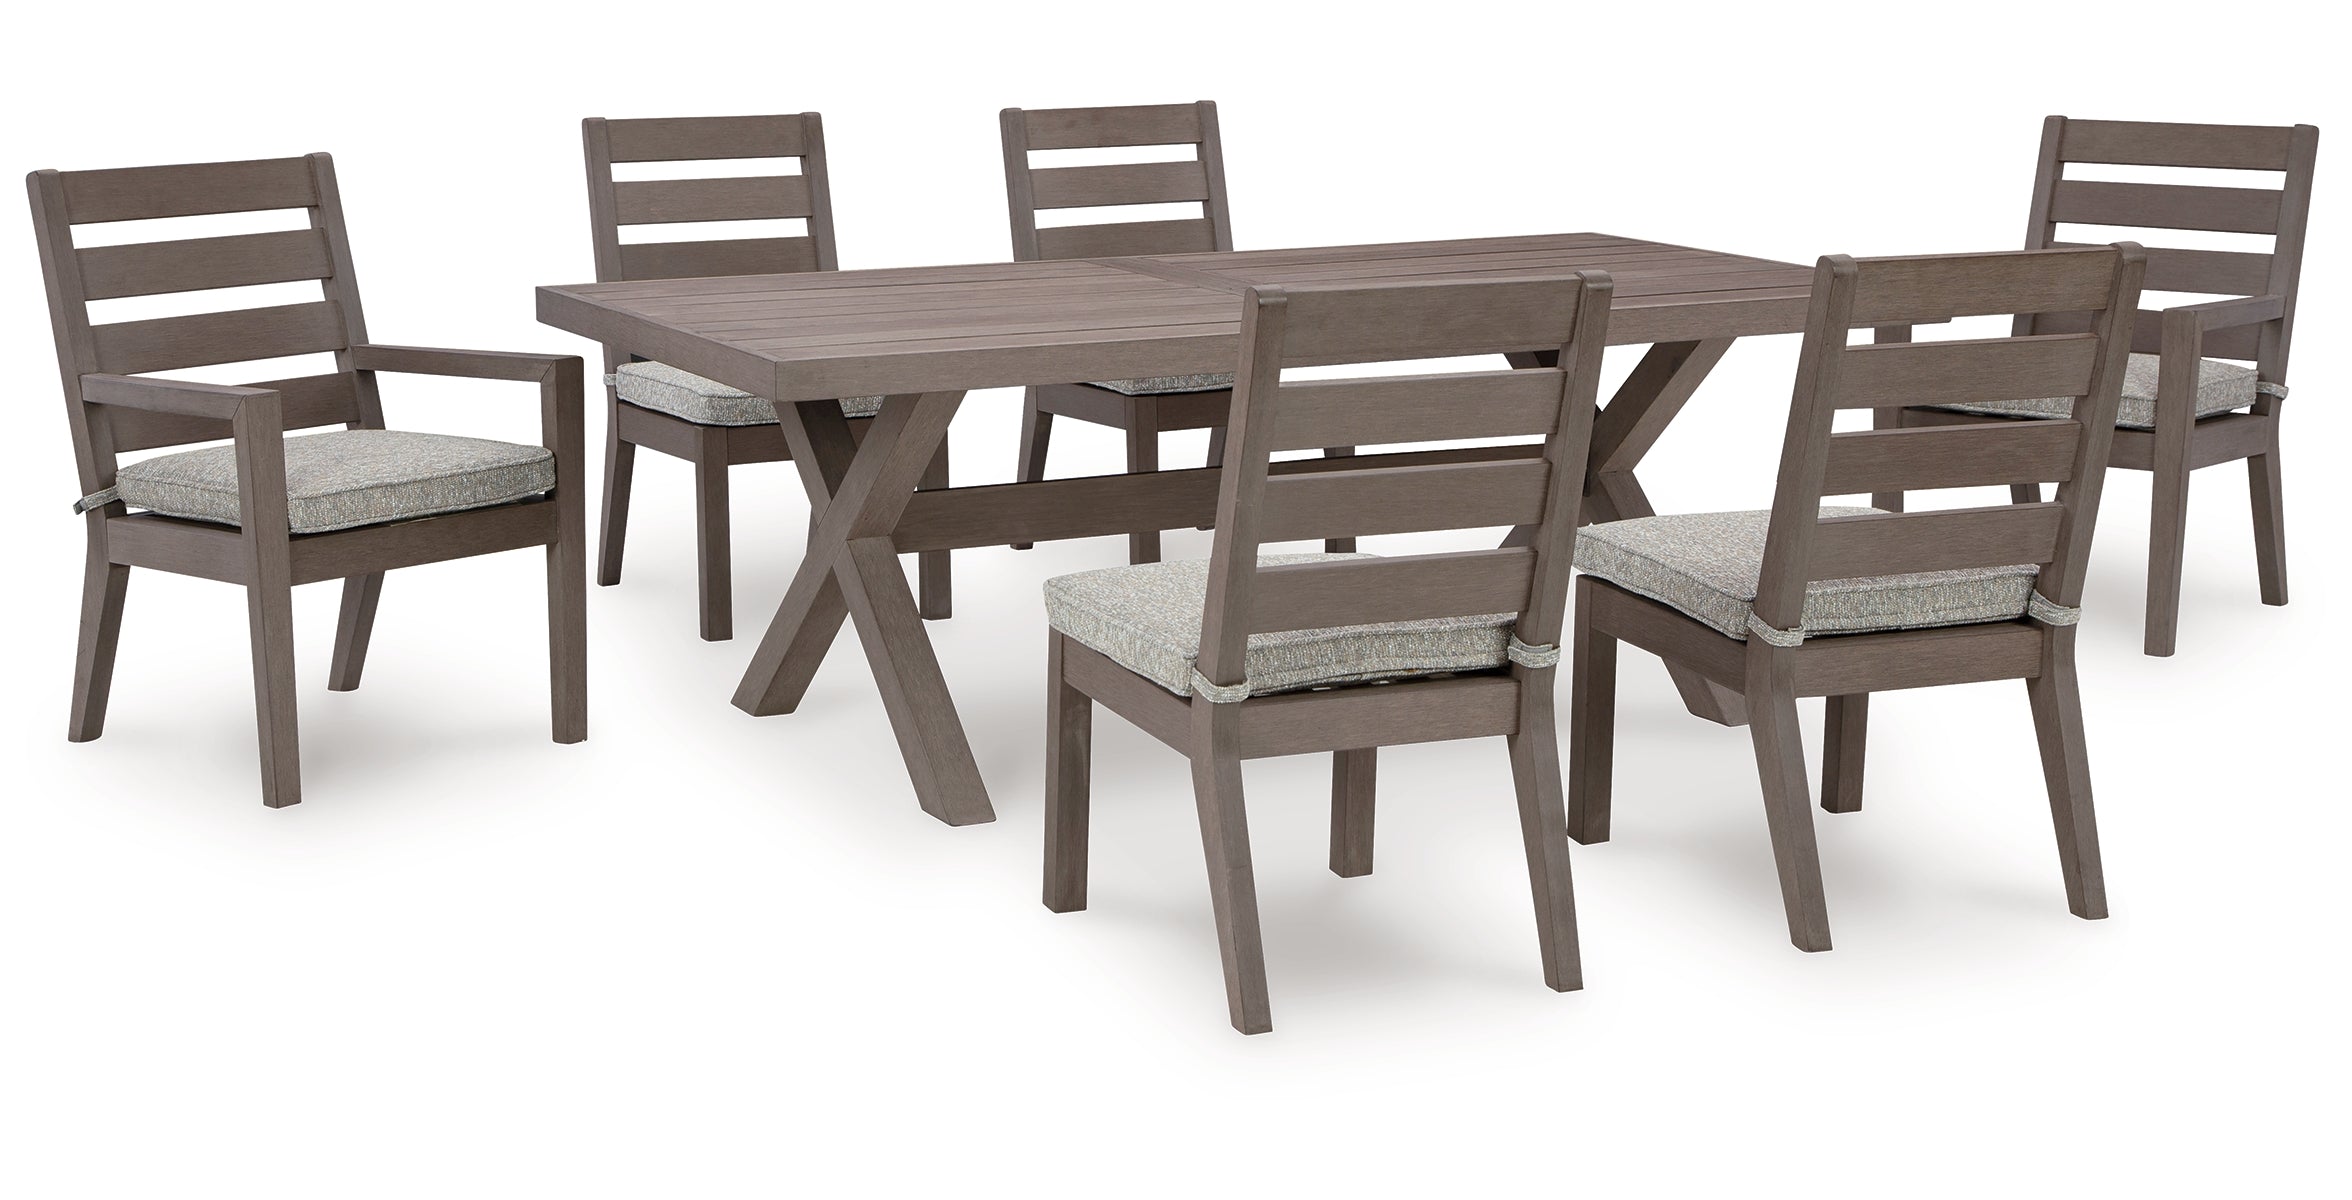 Hillside Barn Outdoor Dining Table and 6 Chairs